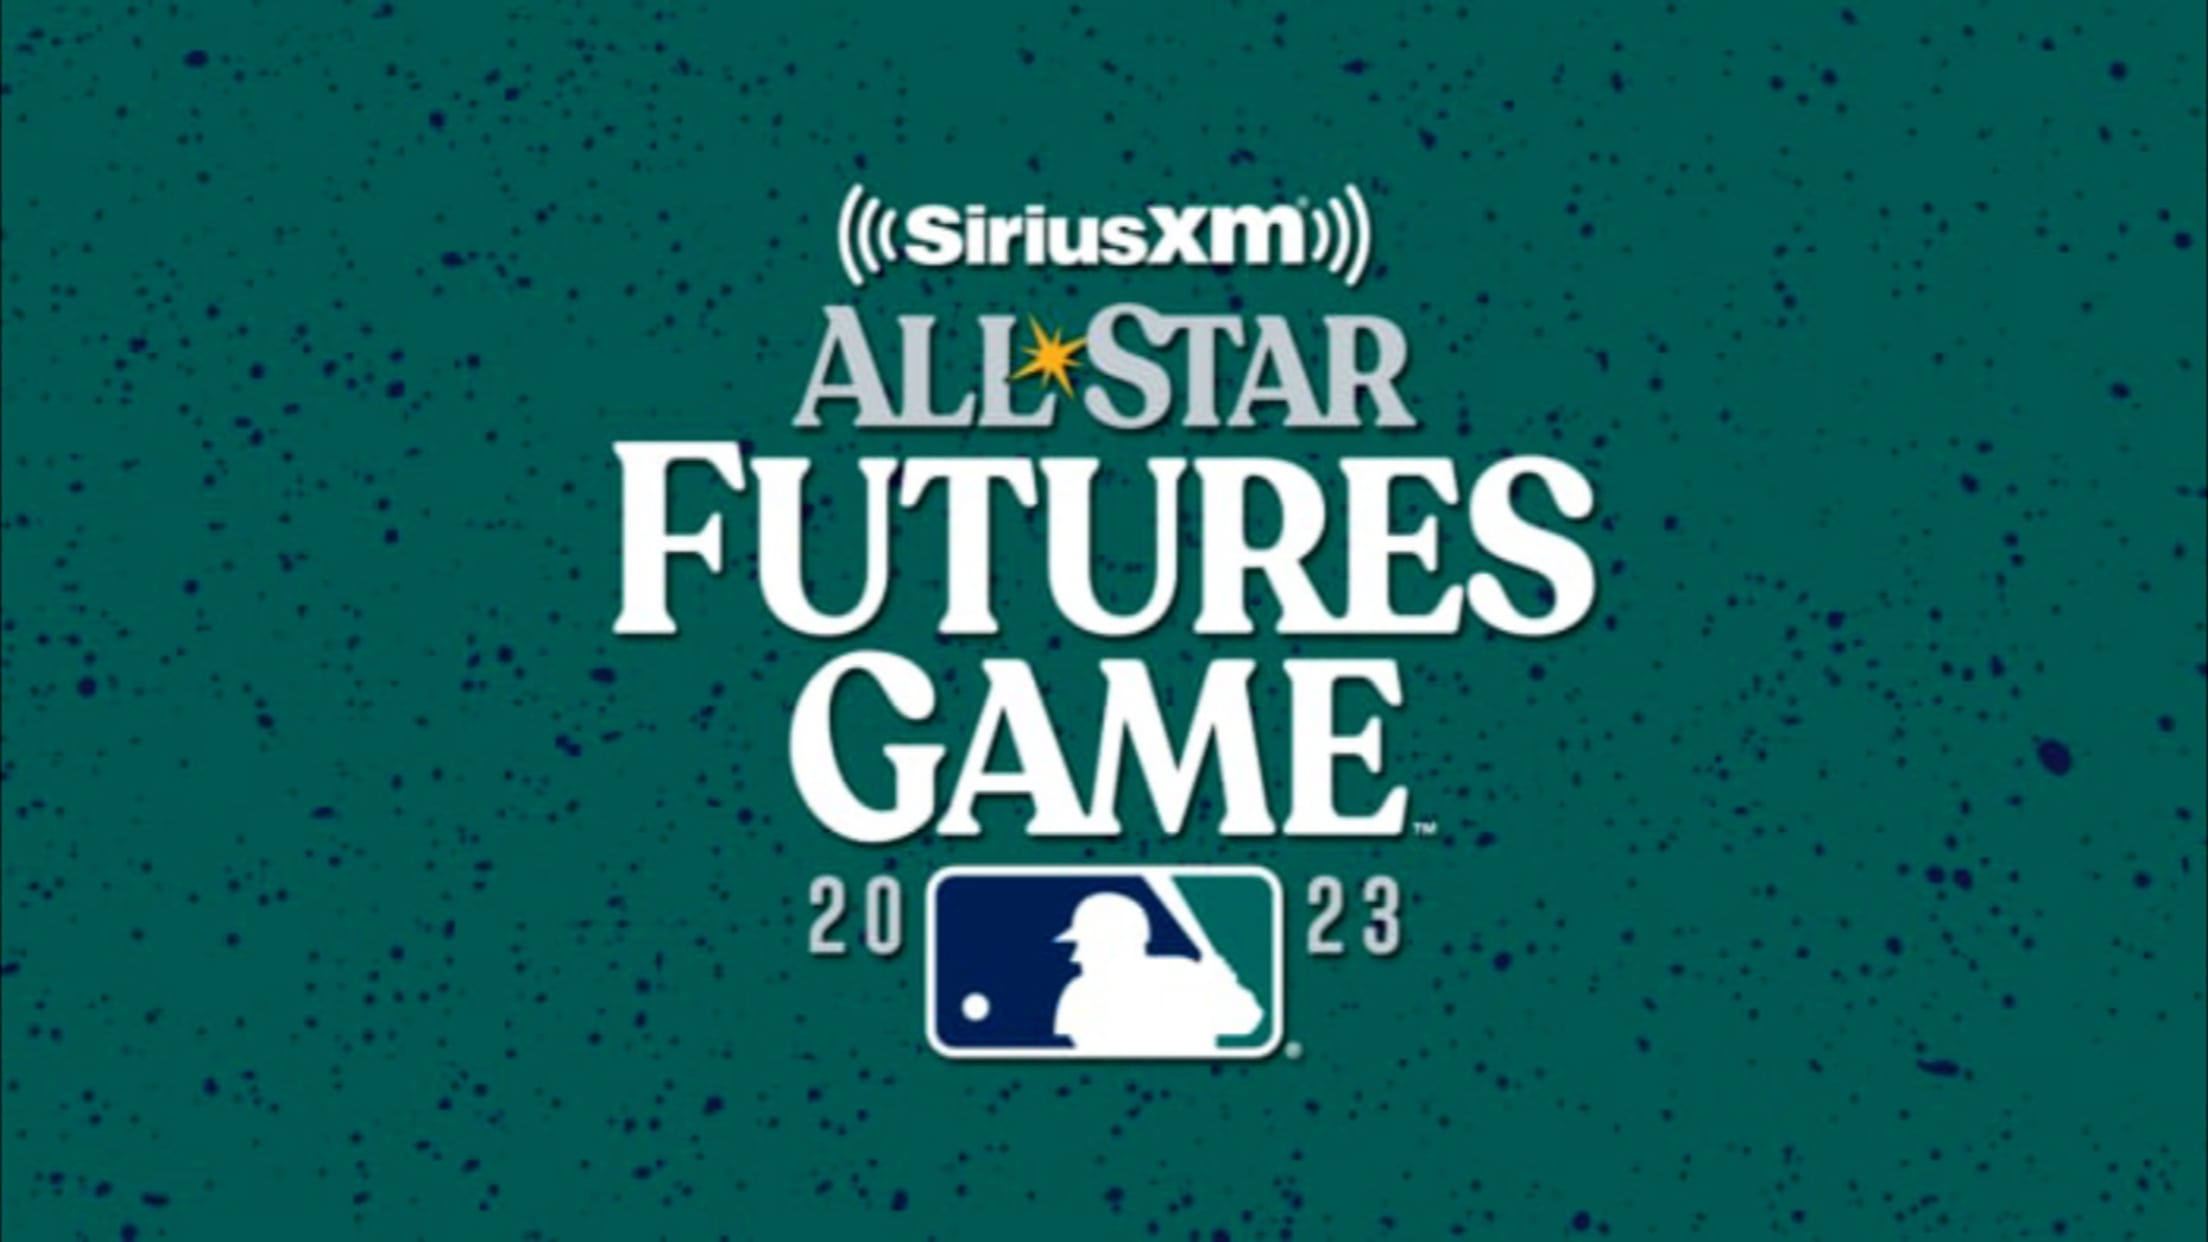 ON THE FIELD At The 2021 MLB Futures Game, All-Star Weekend: Episode 3